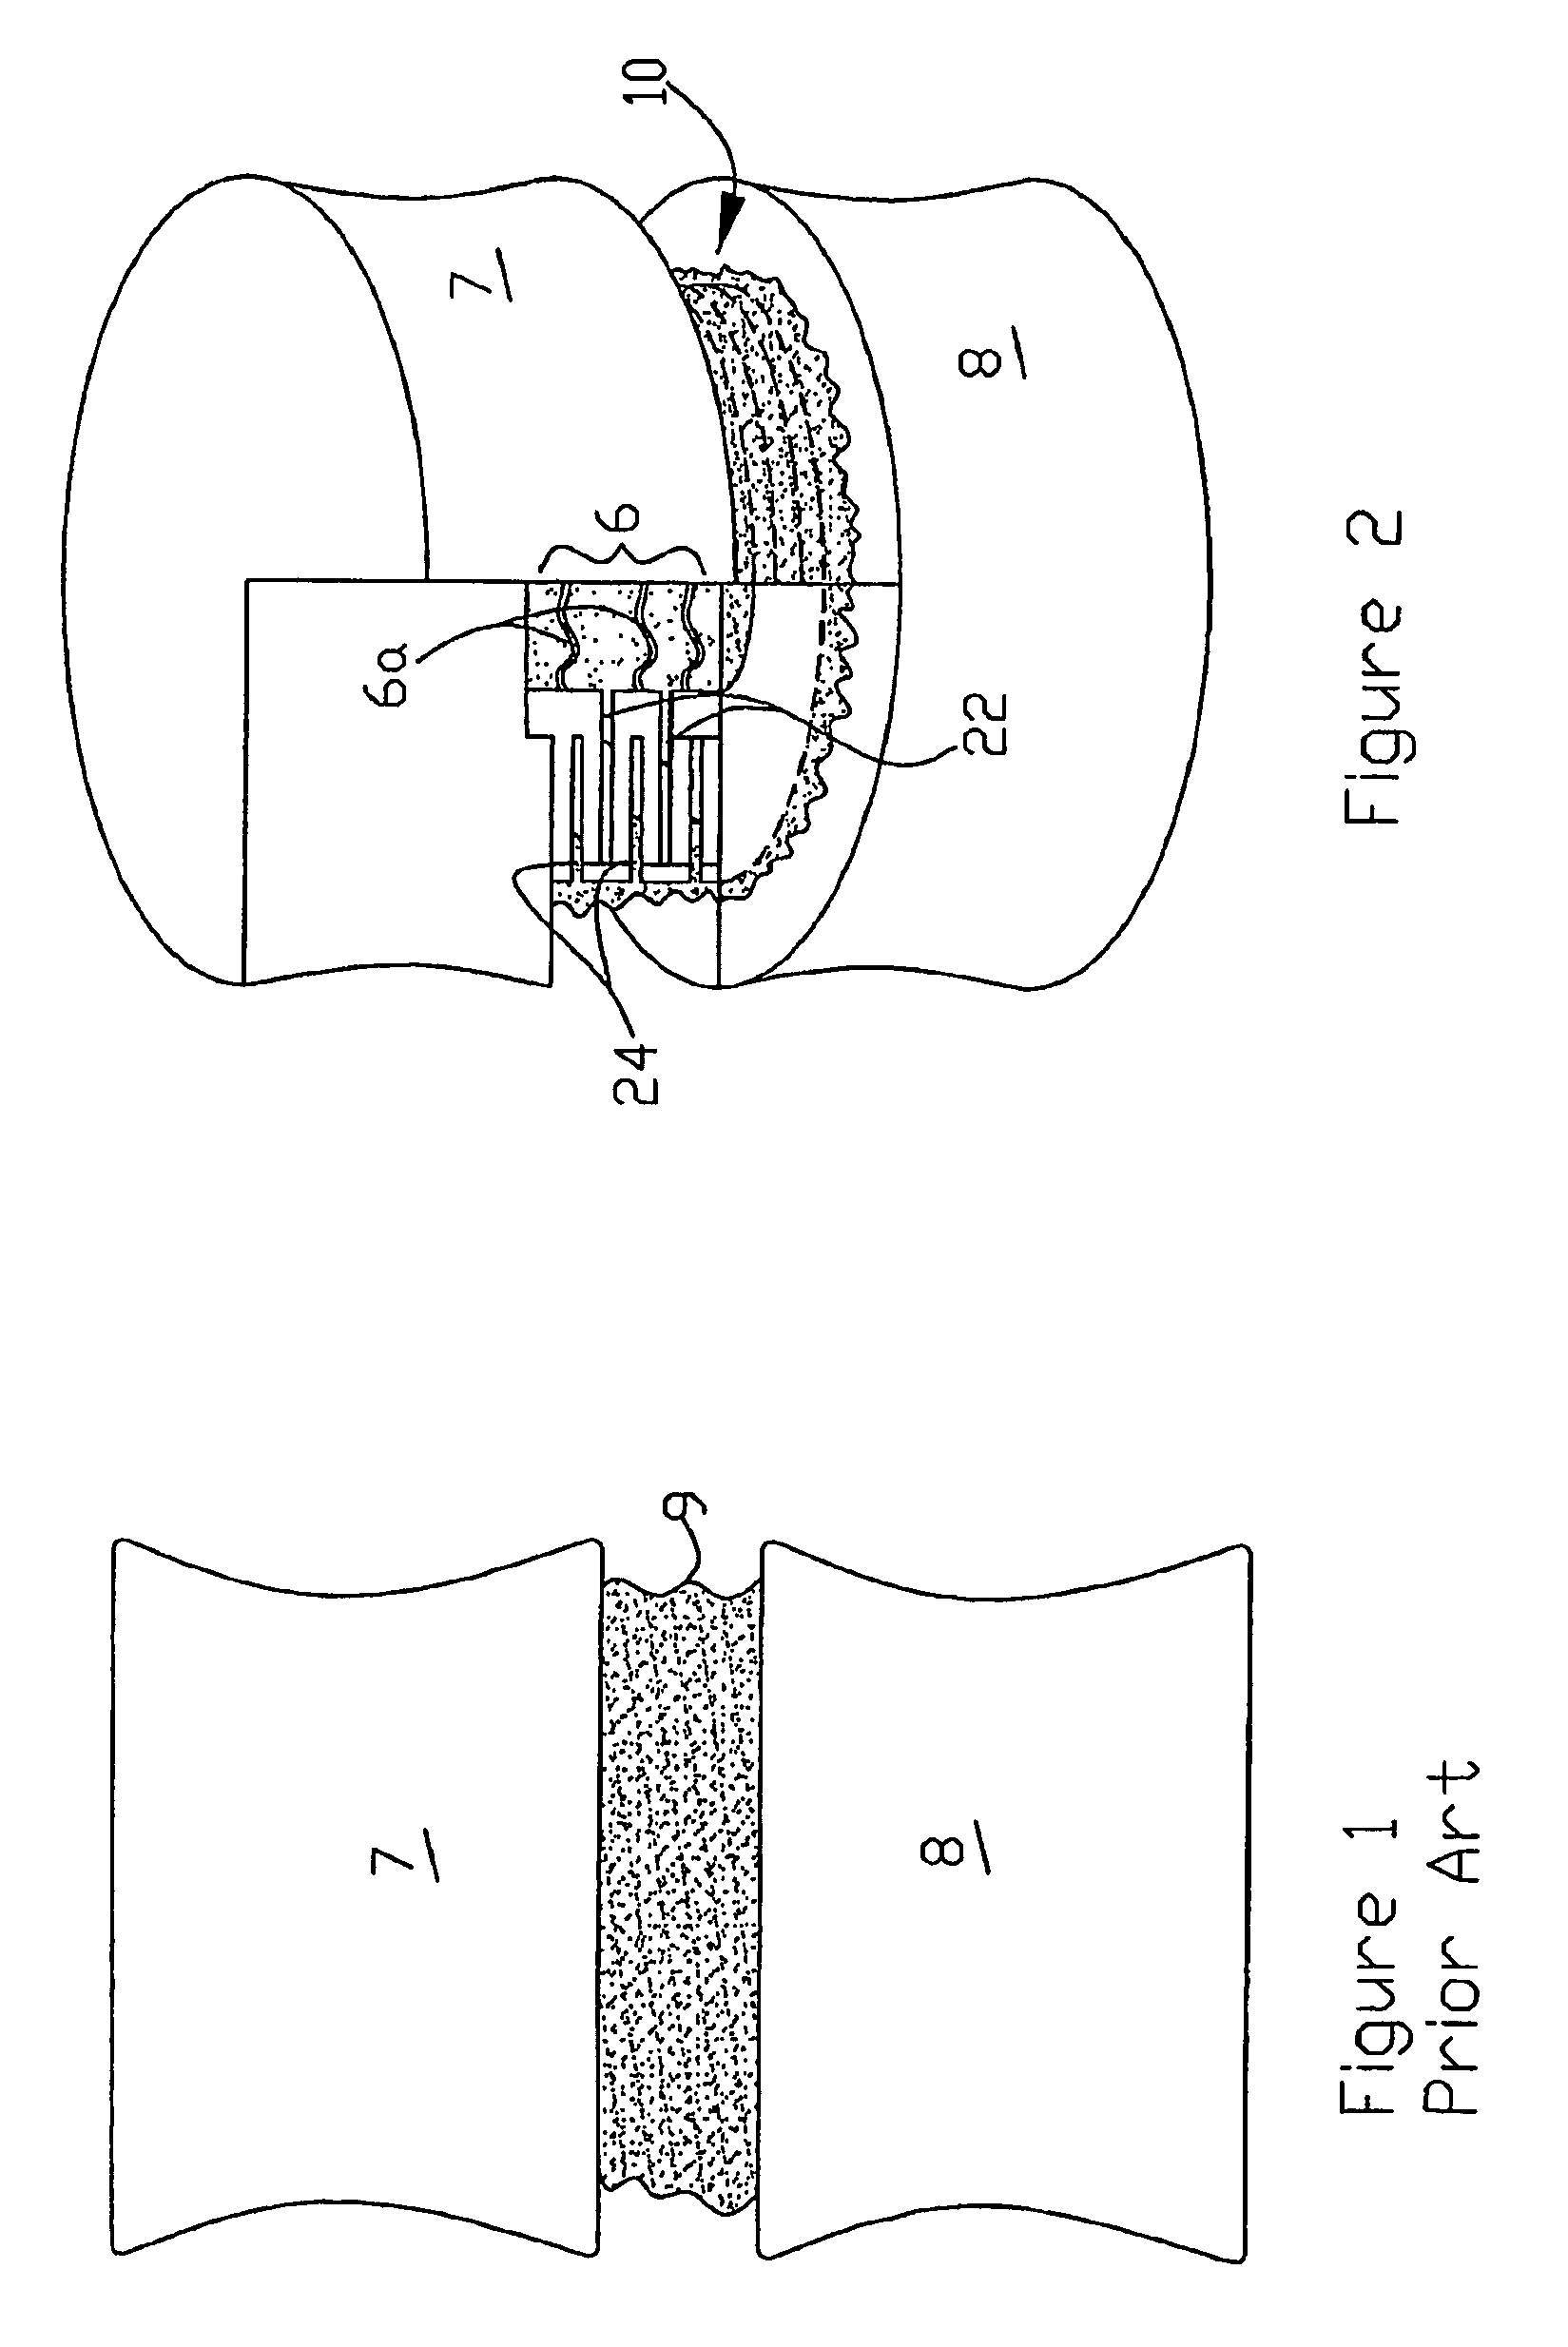 Intervertebral prosthesis for supporting adjacent vertebral bodies enabling the creation of soft fusion and method